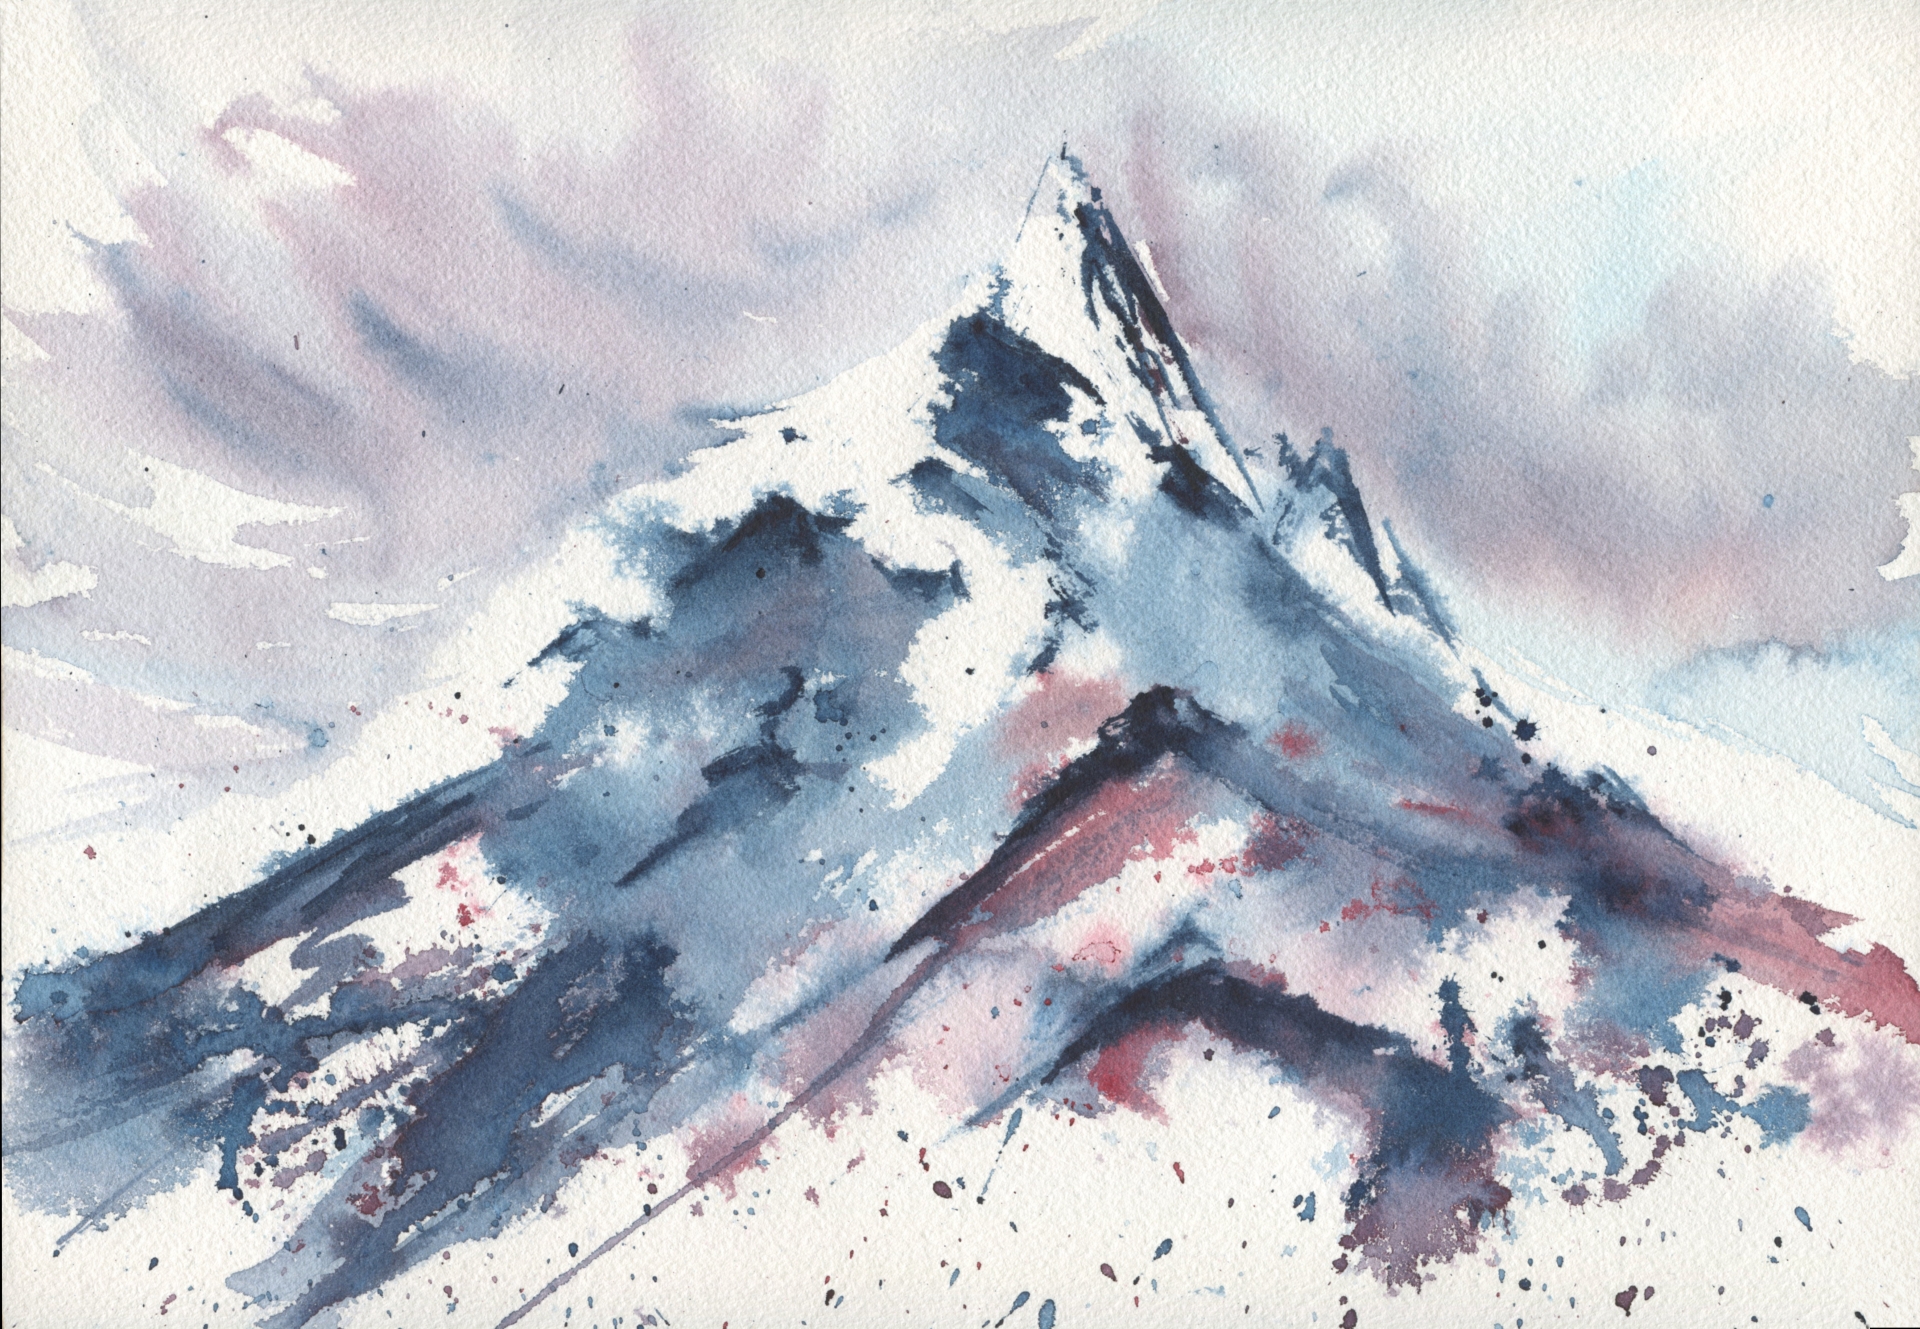 expressive painting of a snowy mountain